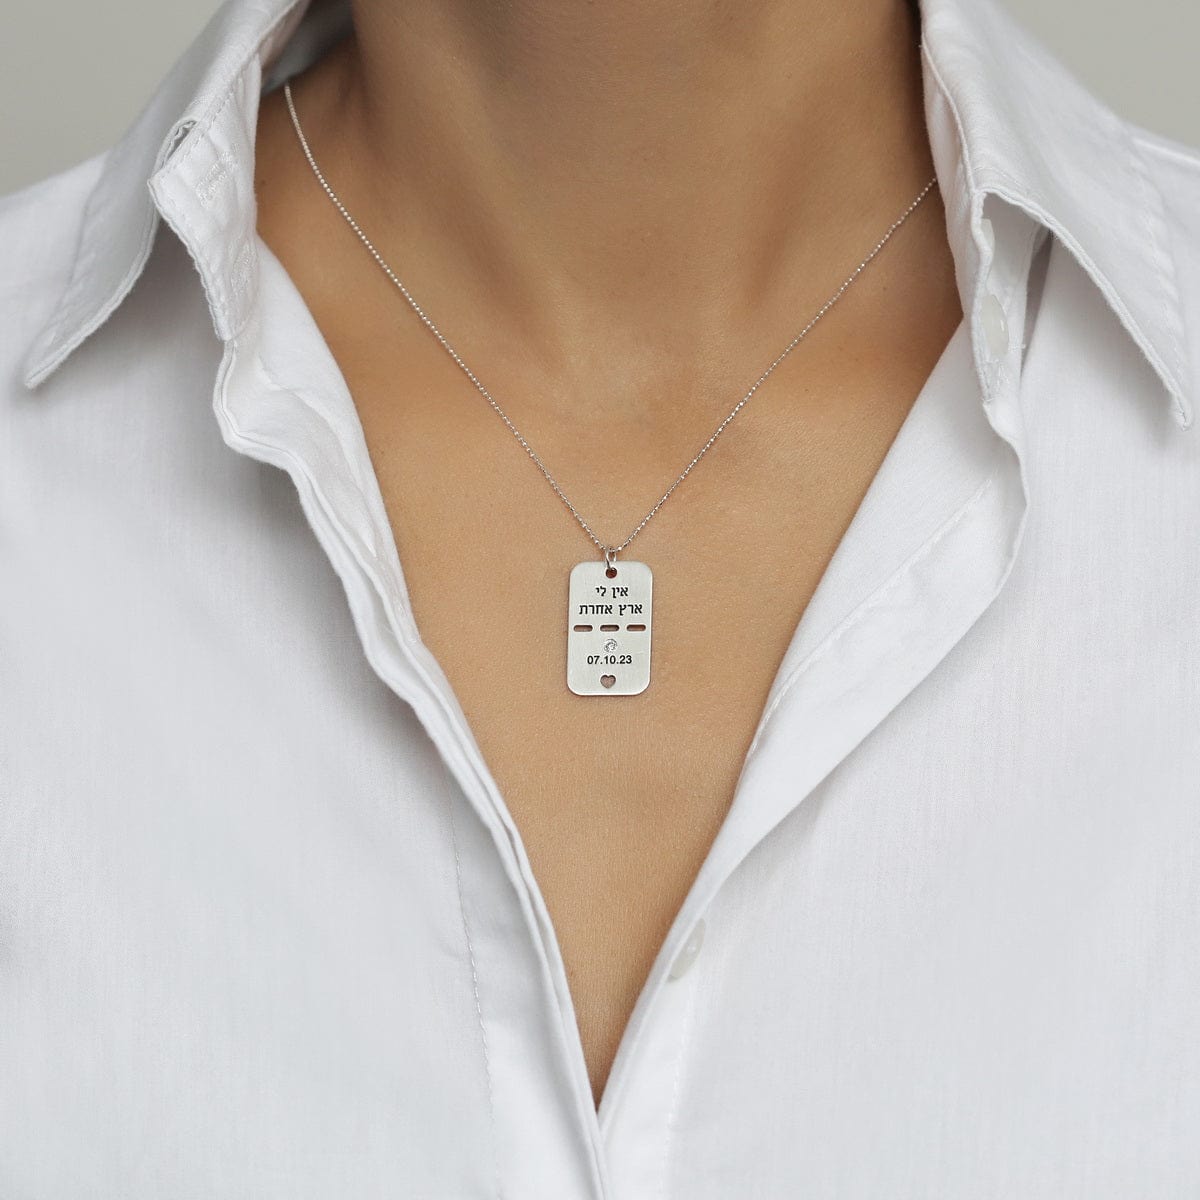 Dalia T Online Silver Tag with a Diamond - Never Forget- S